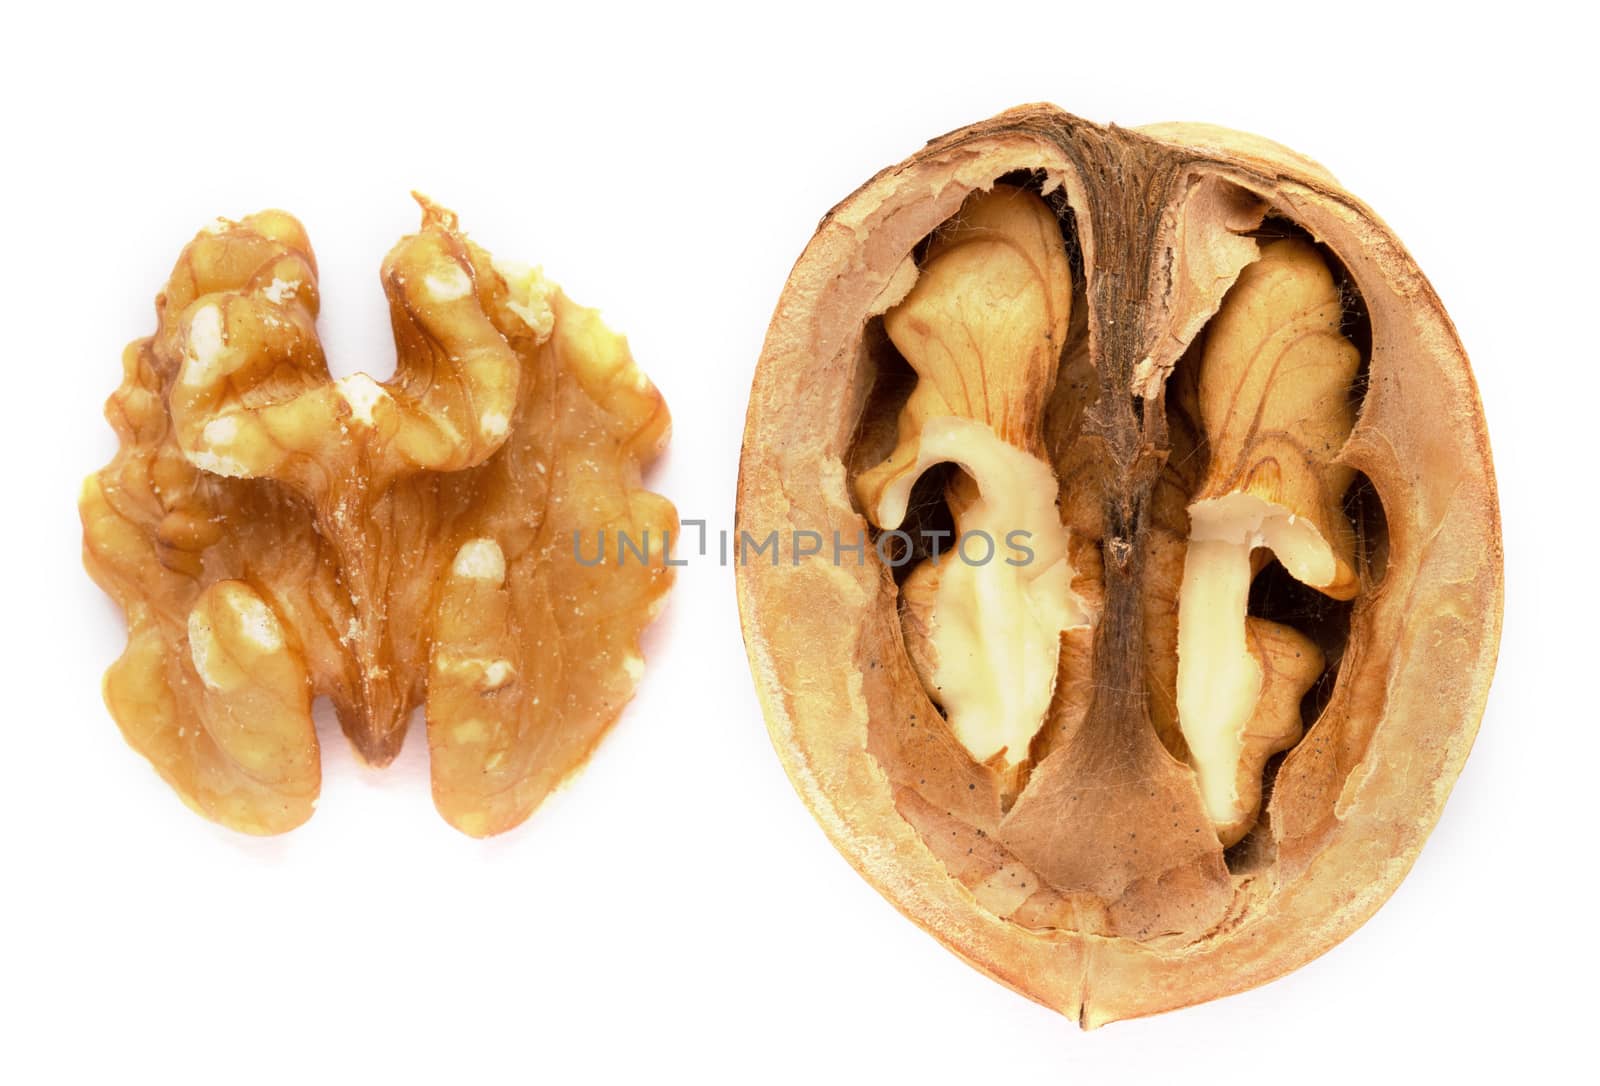 Some Shelled walnuts on a white background